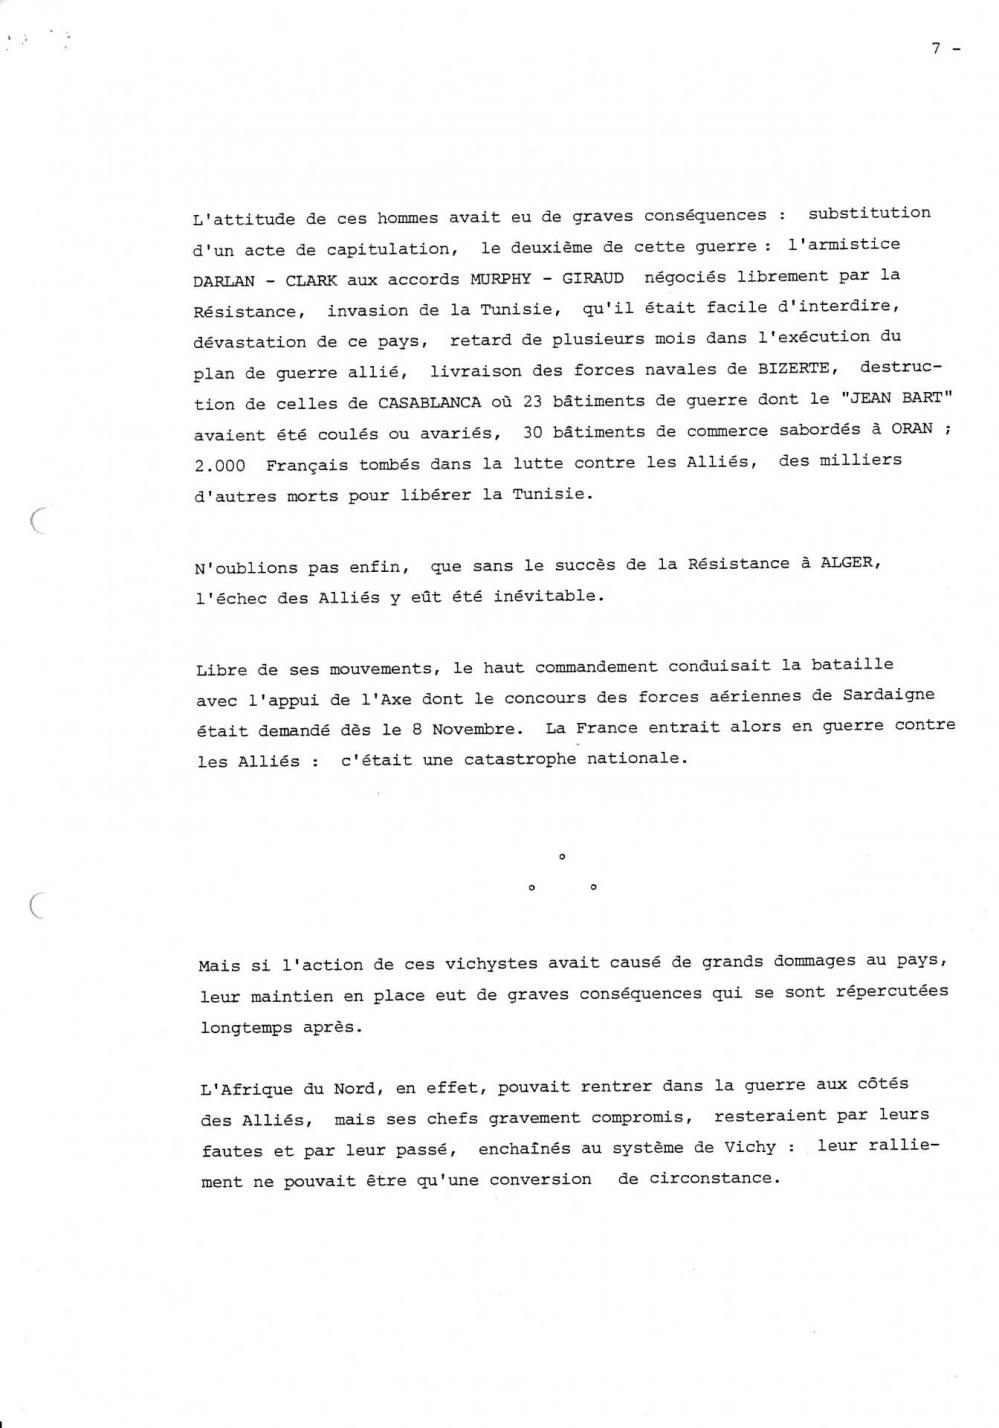 General jousse page7